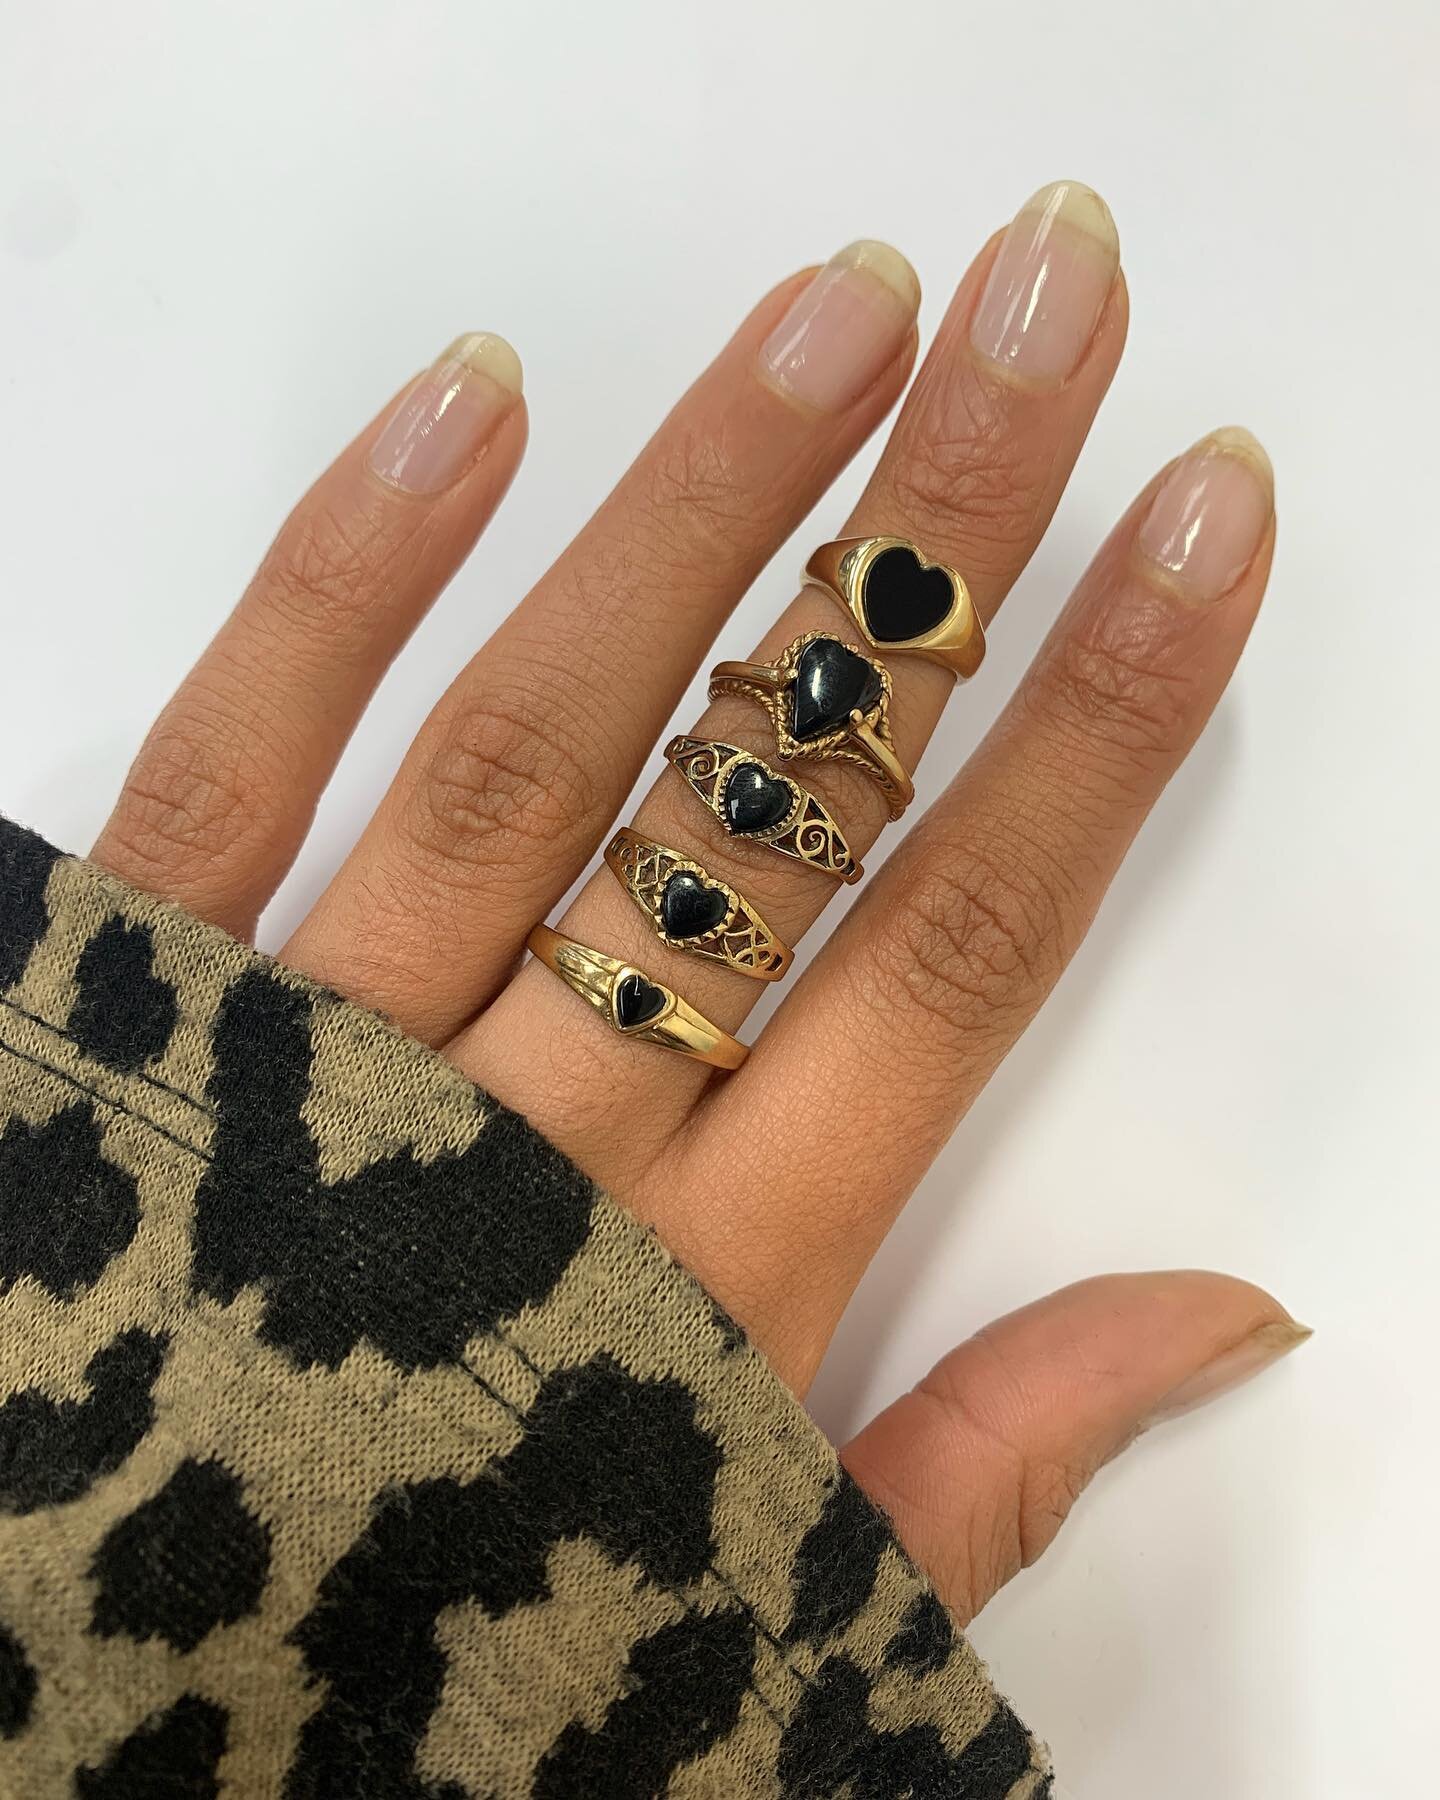 Heart rings never looked so good! 🖤
9ct gold and #onyx rings.
The perfect way to share the love this #valentines